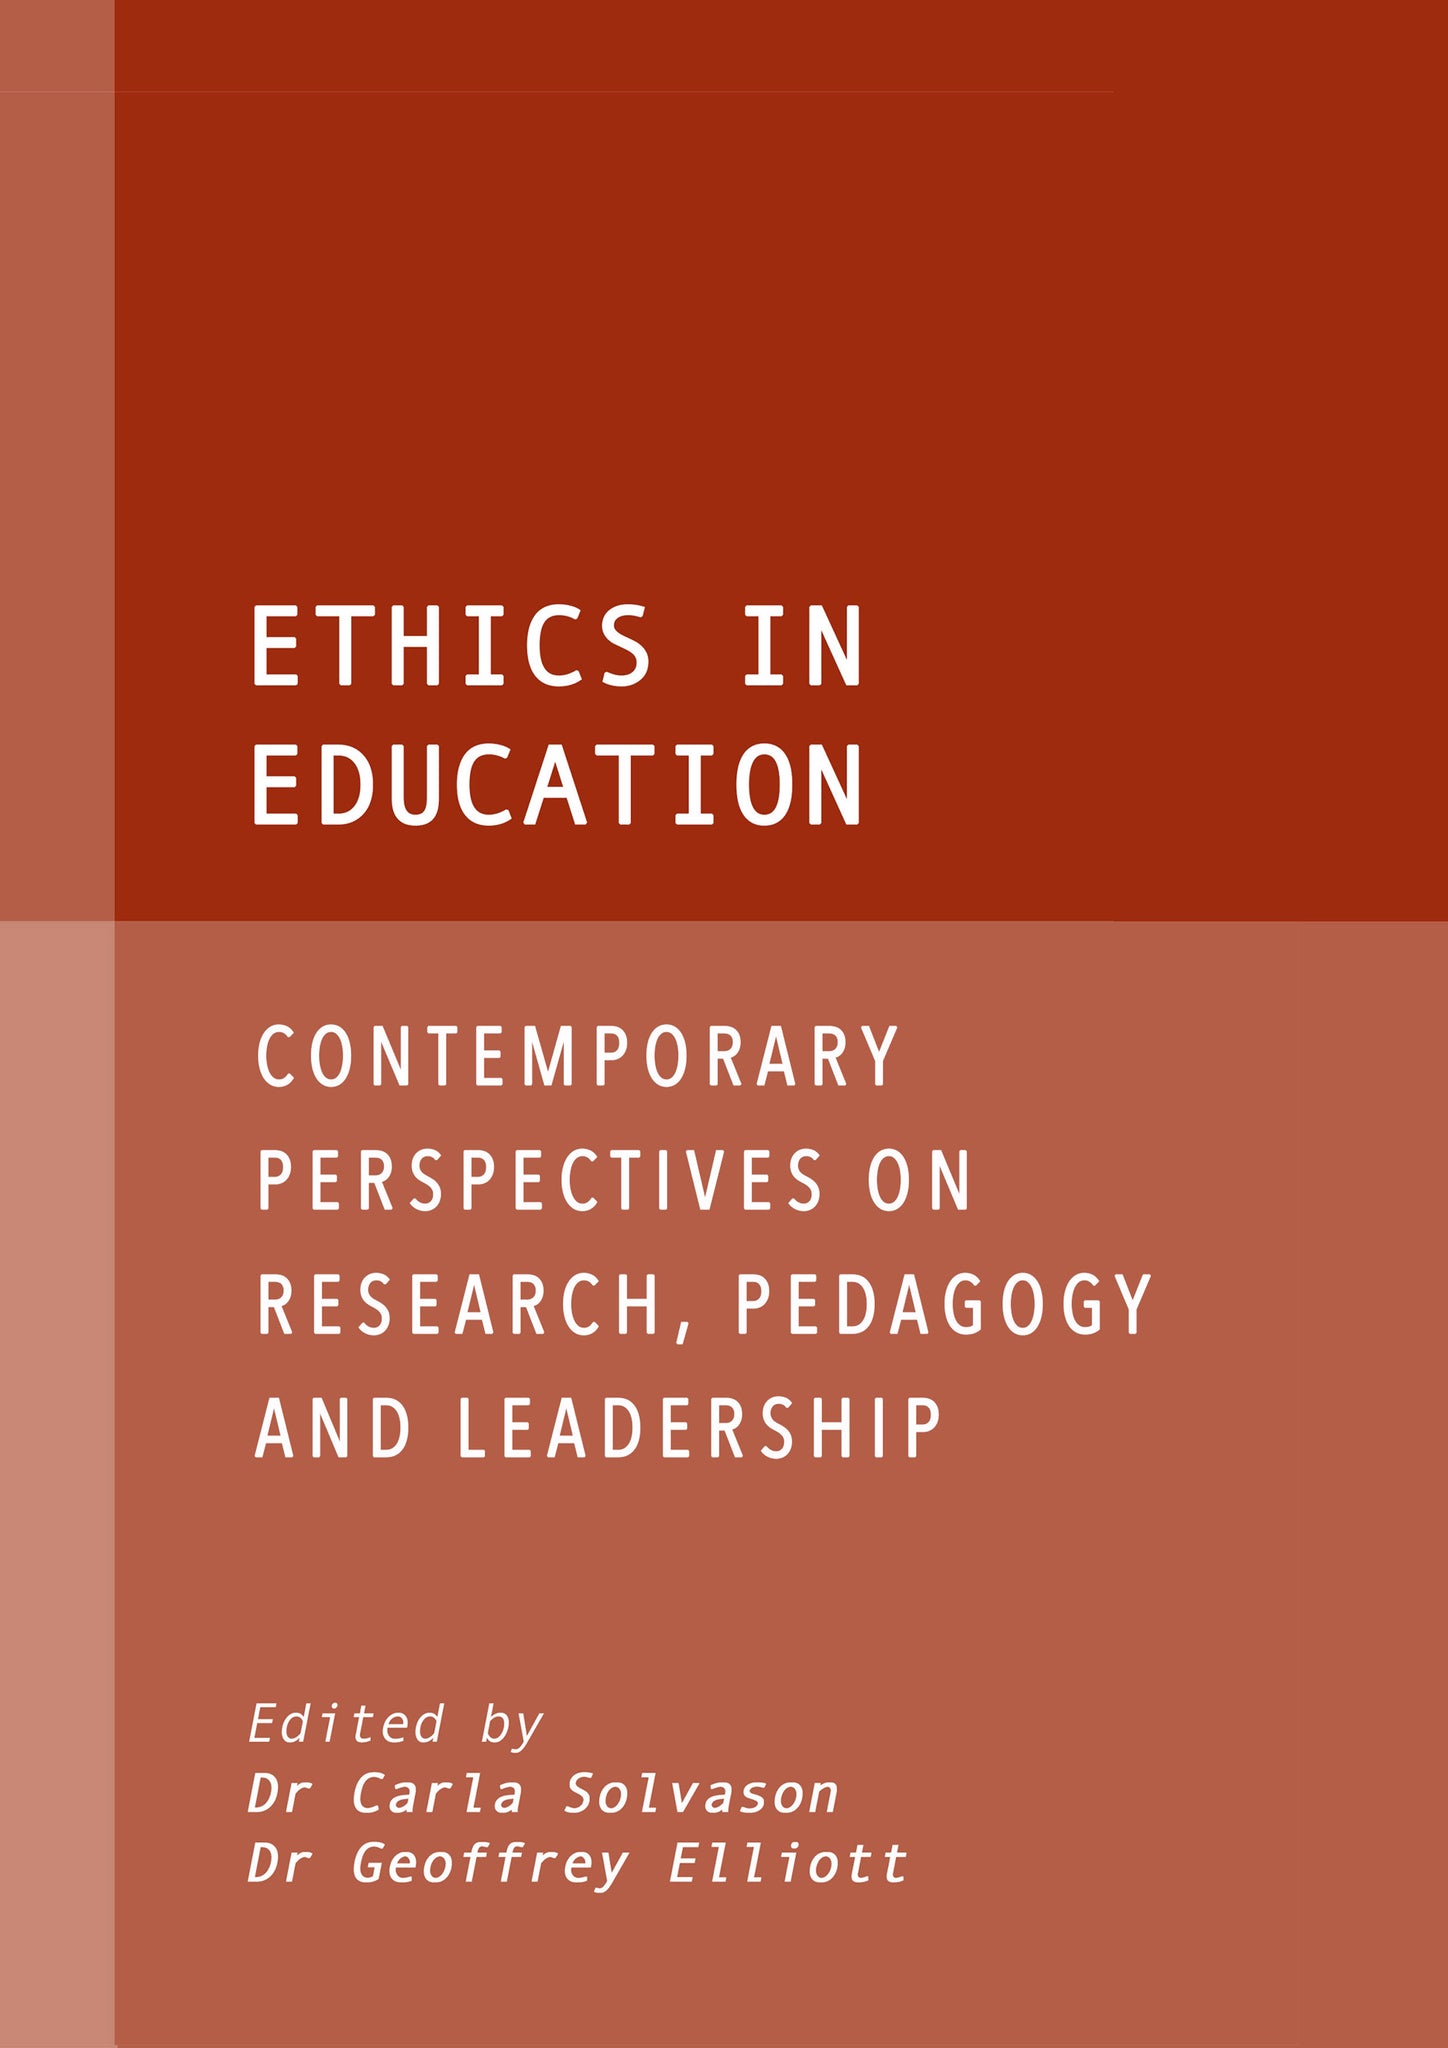 Ethics in Education: Contemporary Perspectives on Research, Pedagogy and Leadership